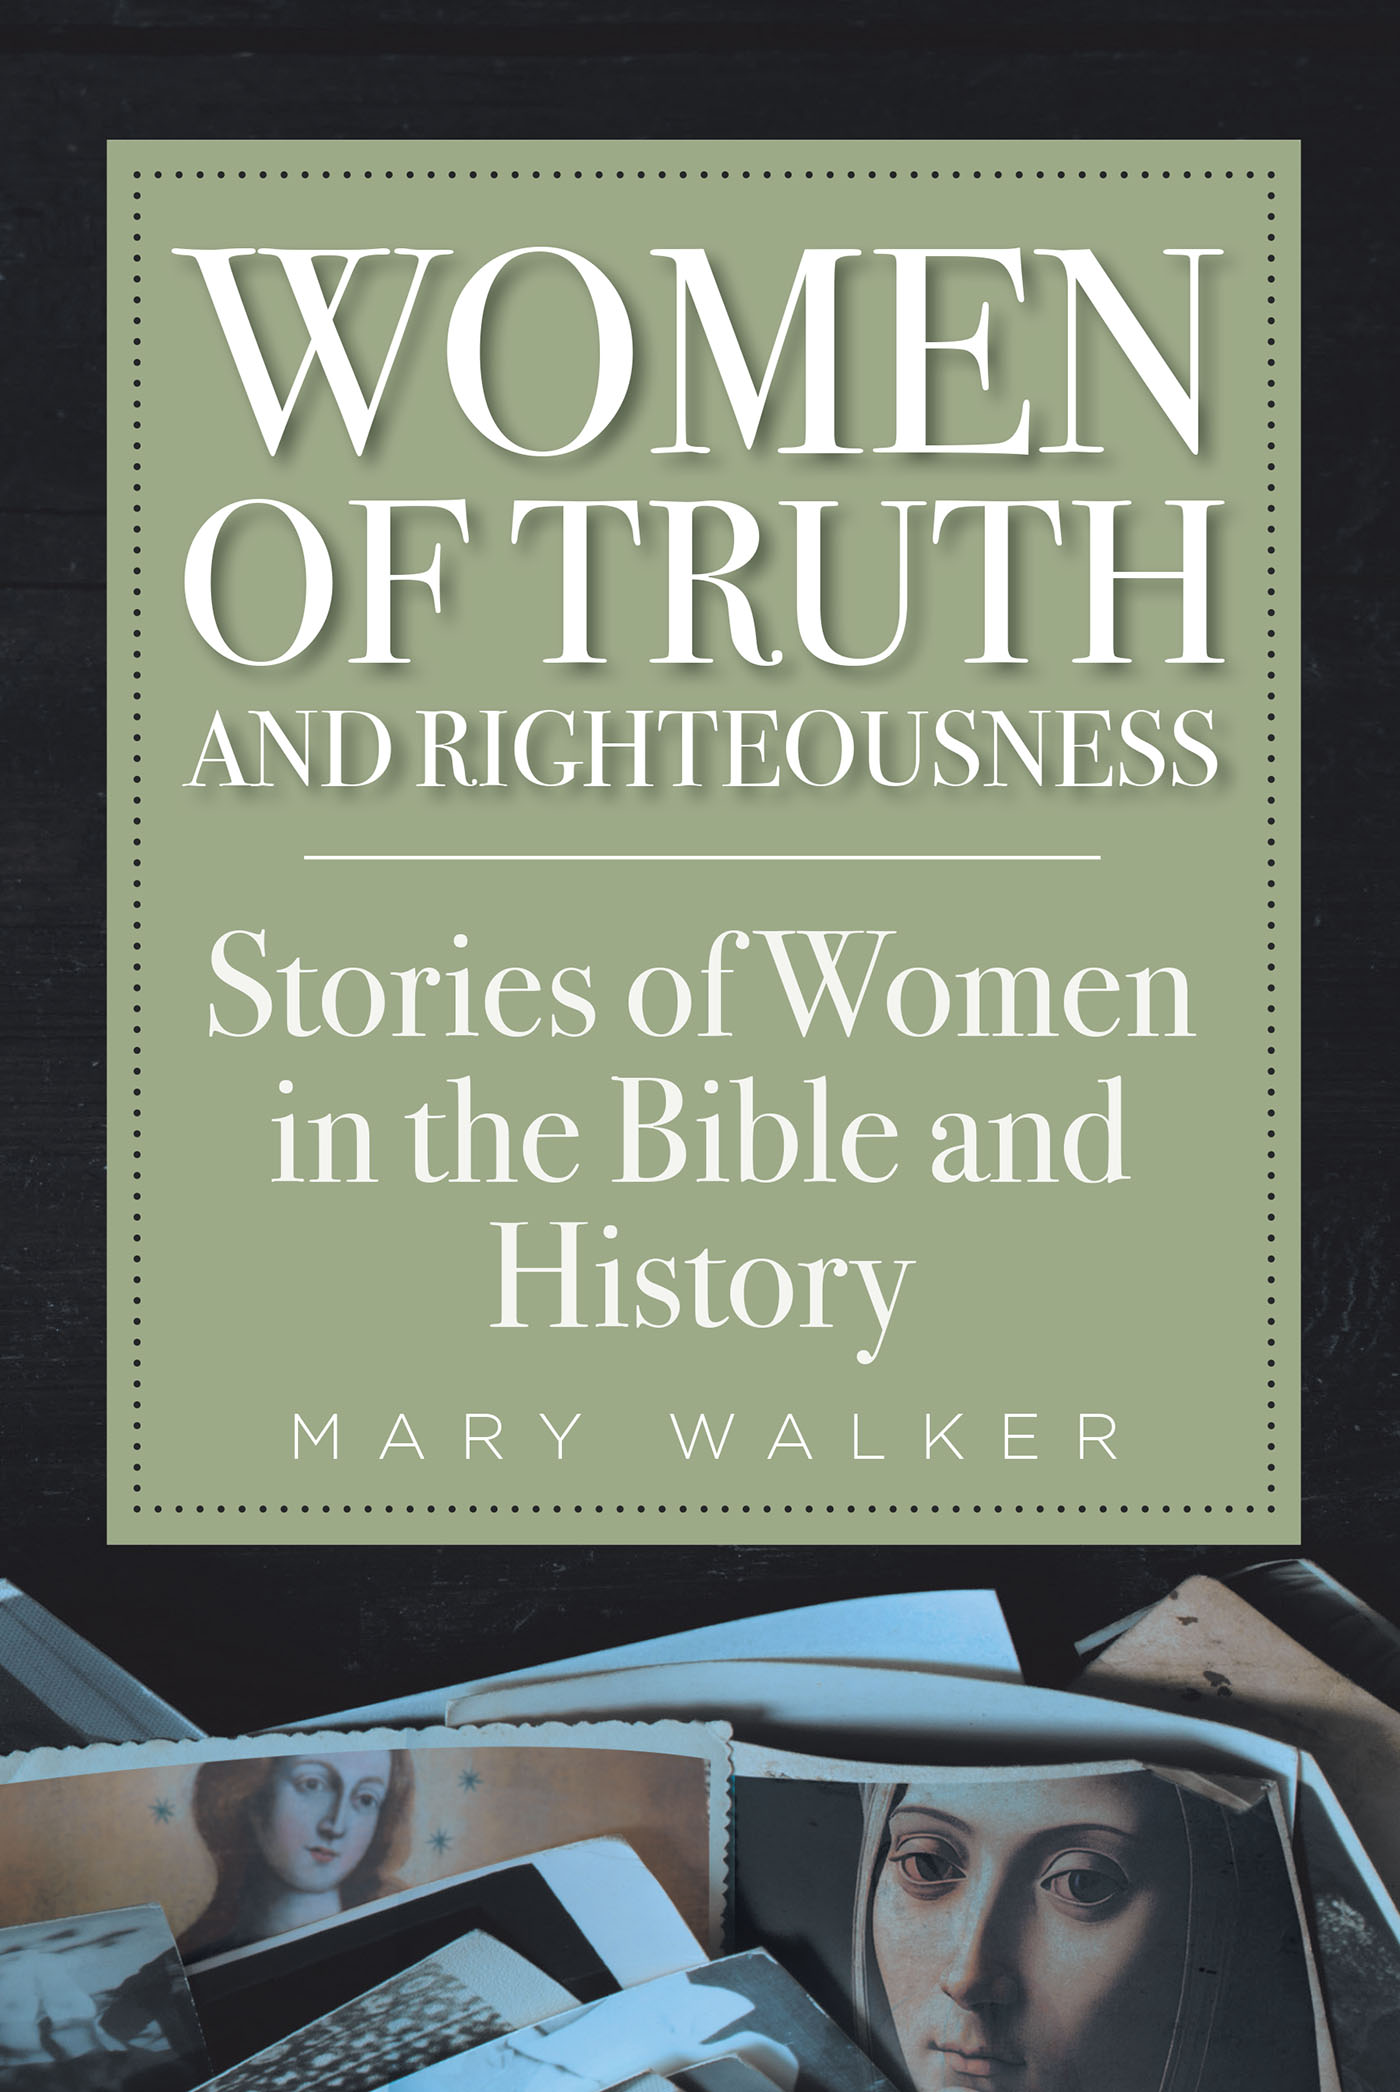 Mary Walker’s Newly Released "Women of Truth and Righteousness" is a Powerful Continuation of the Author’s Women in History Series